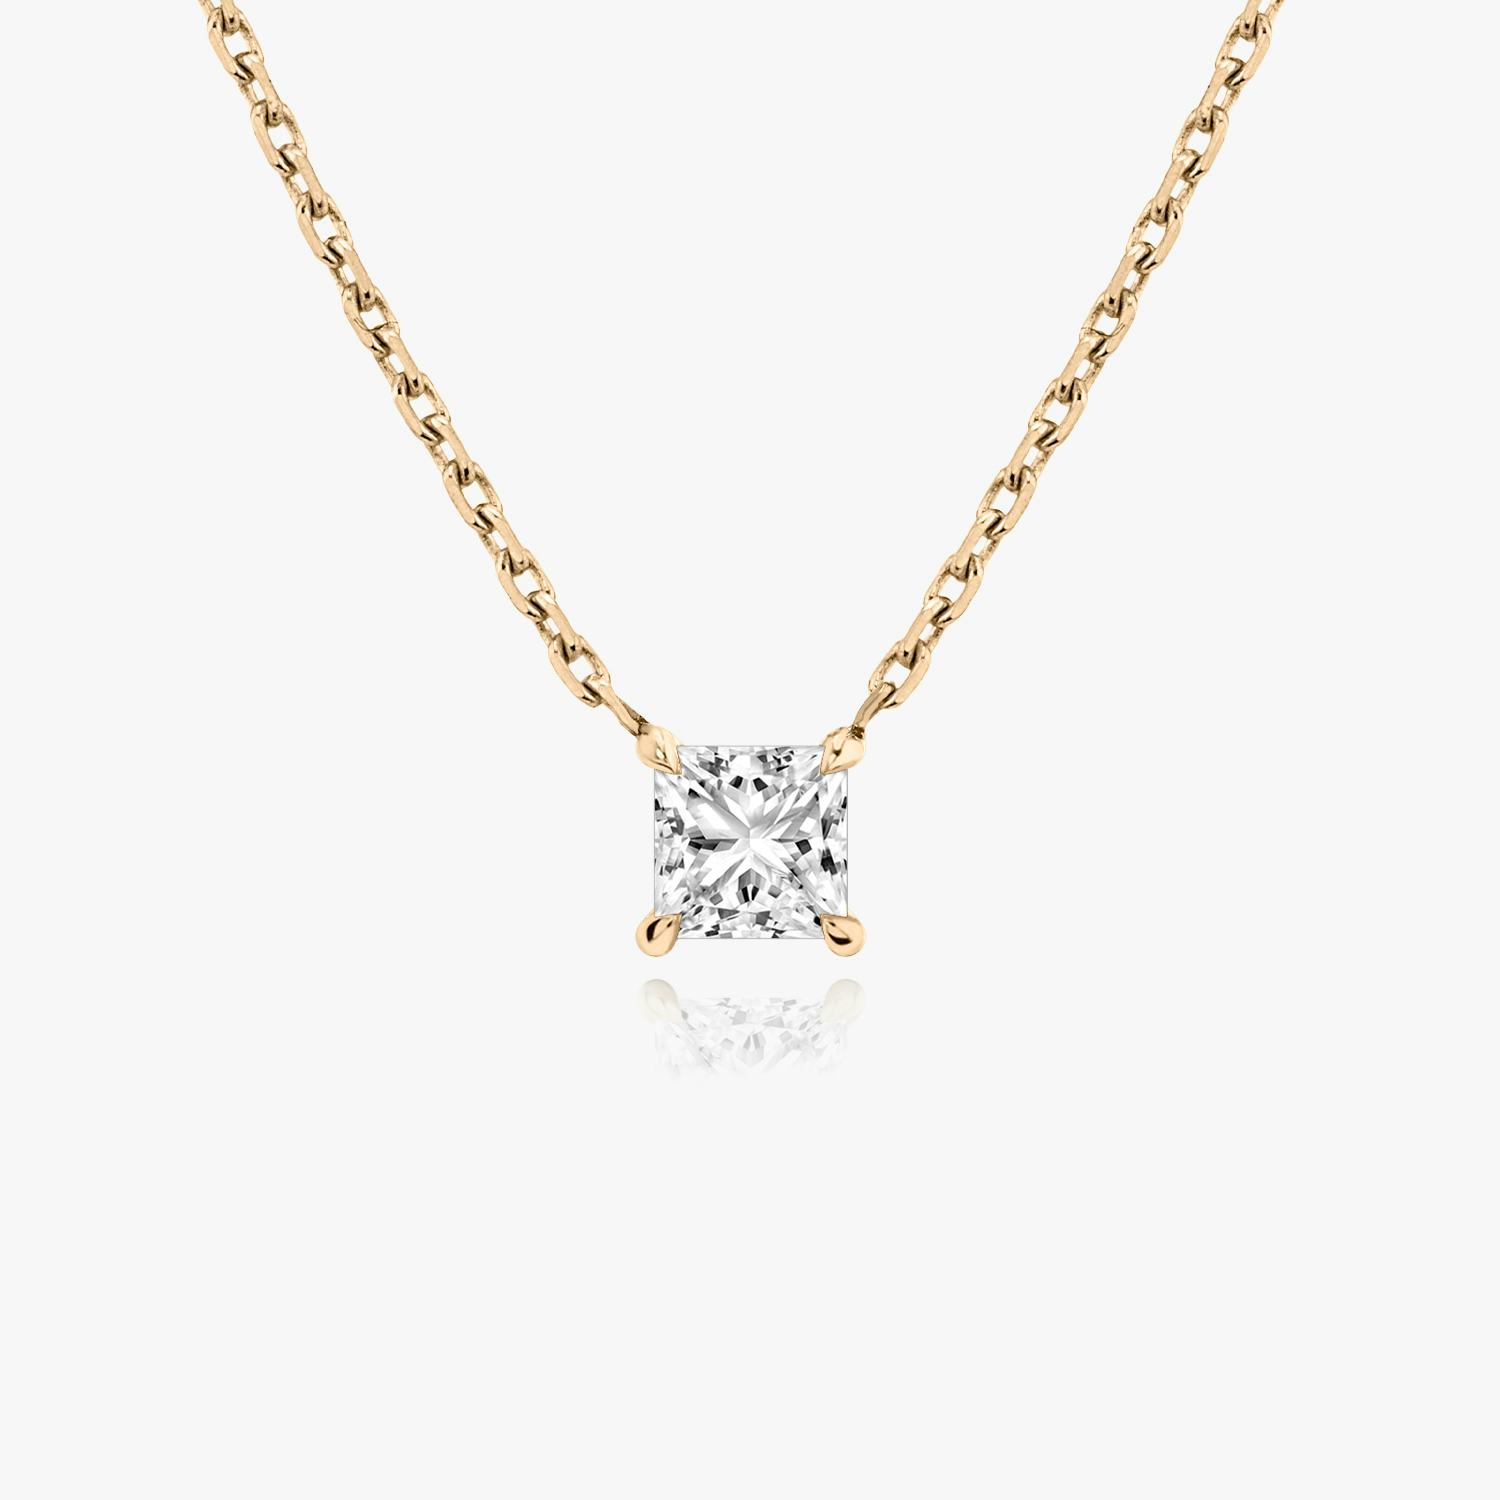 Princess cut diamond necklace in rose gold front view